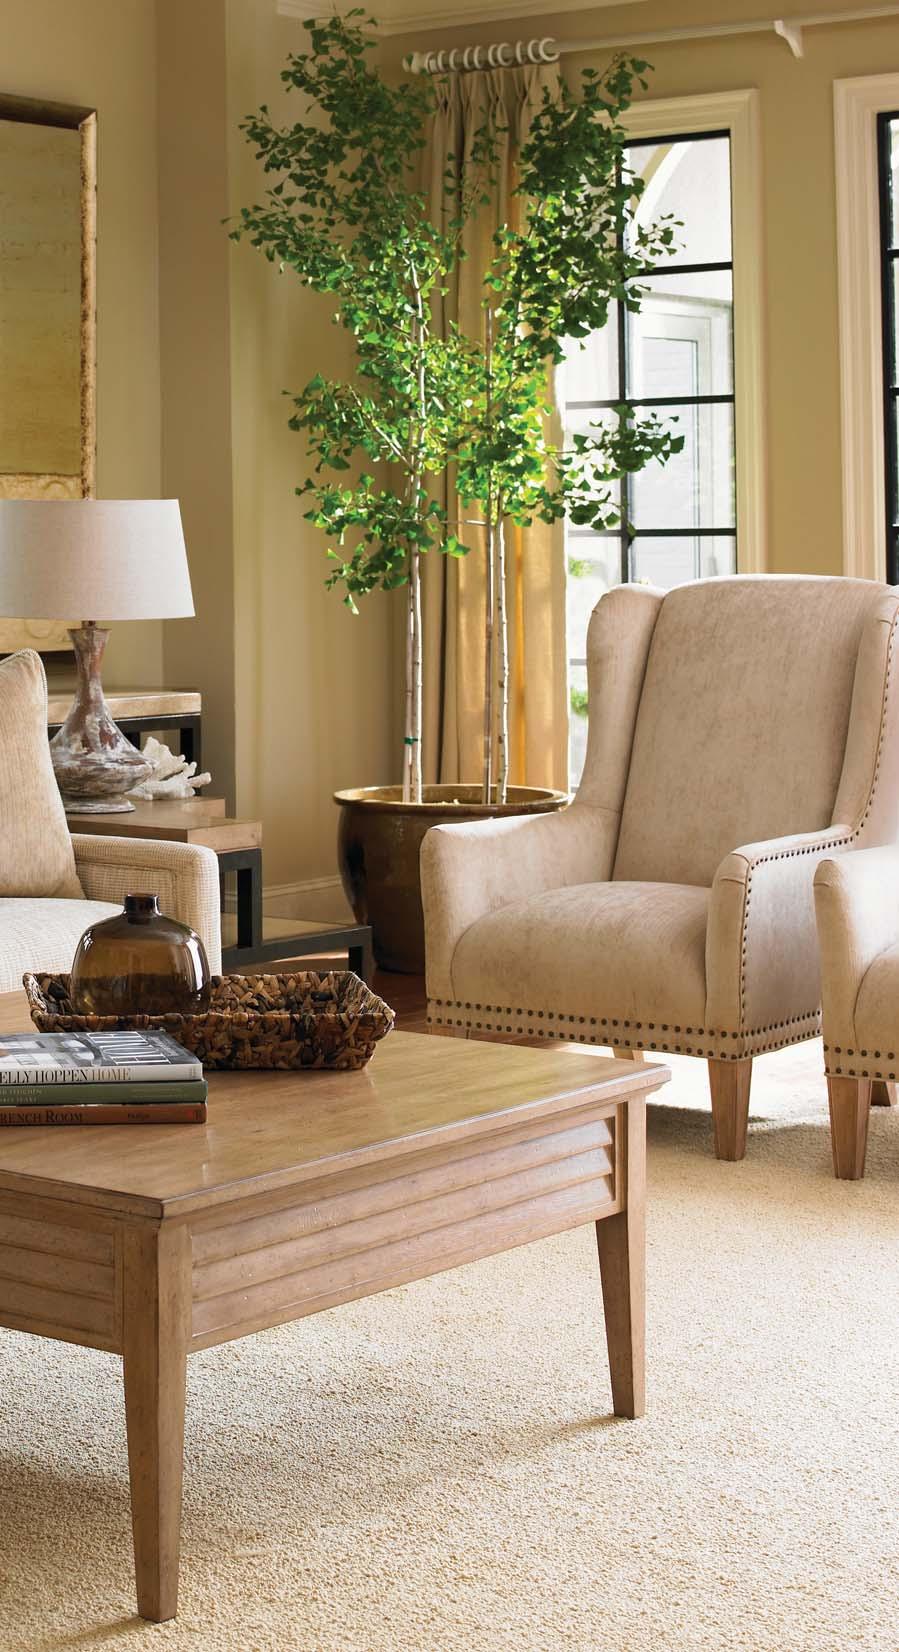 Living Room Hues of sand, parchment and driftwood create an elegant coastal-inspired setting that compliments the Cambria wood fi nish.